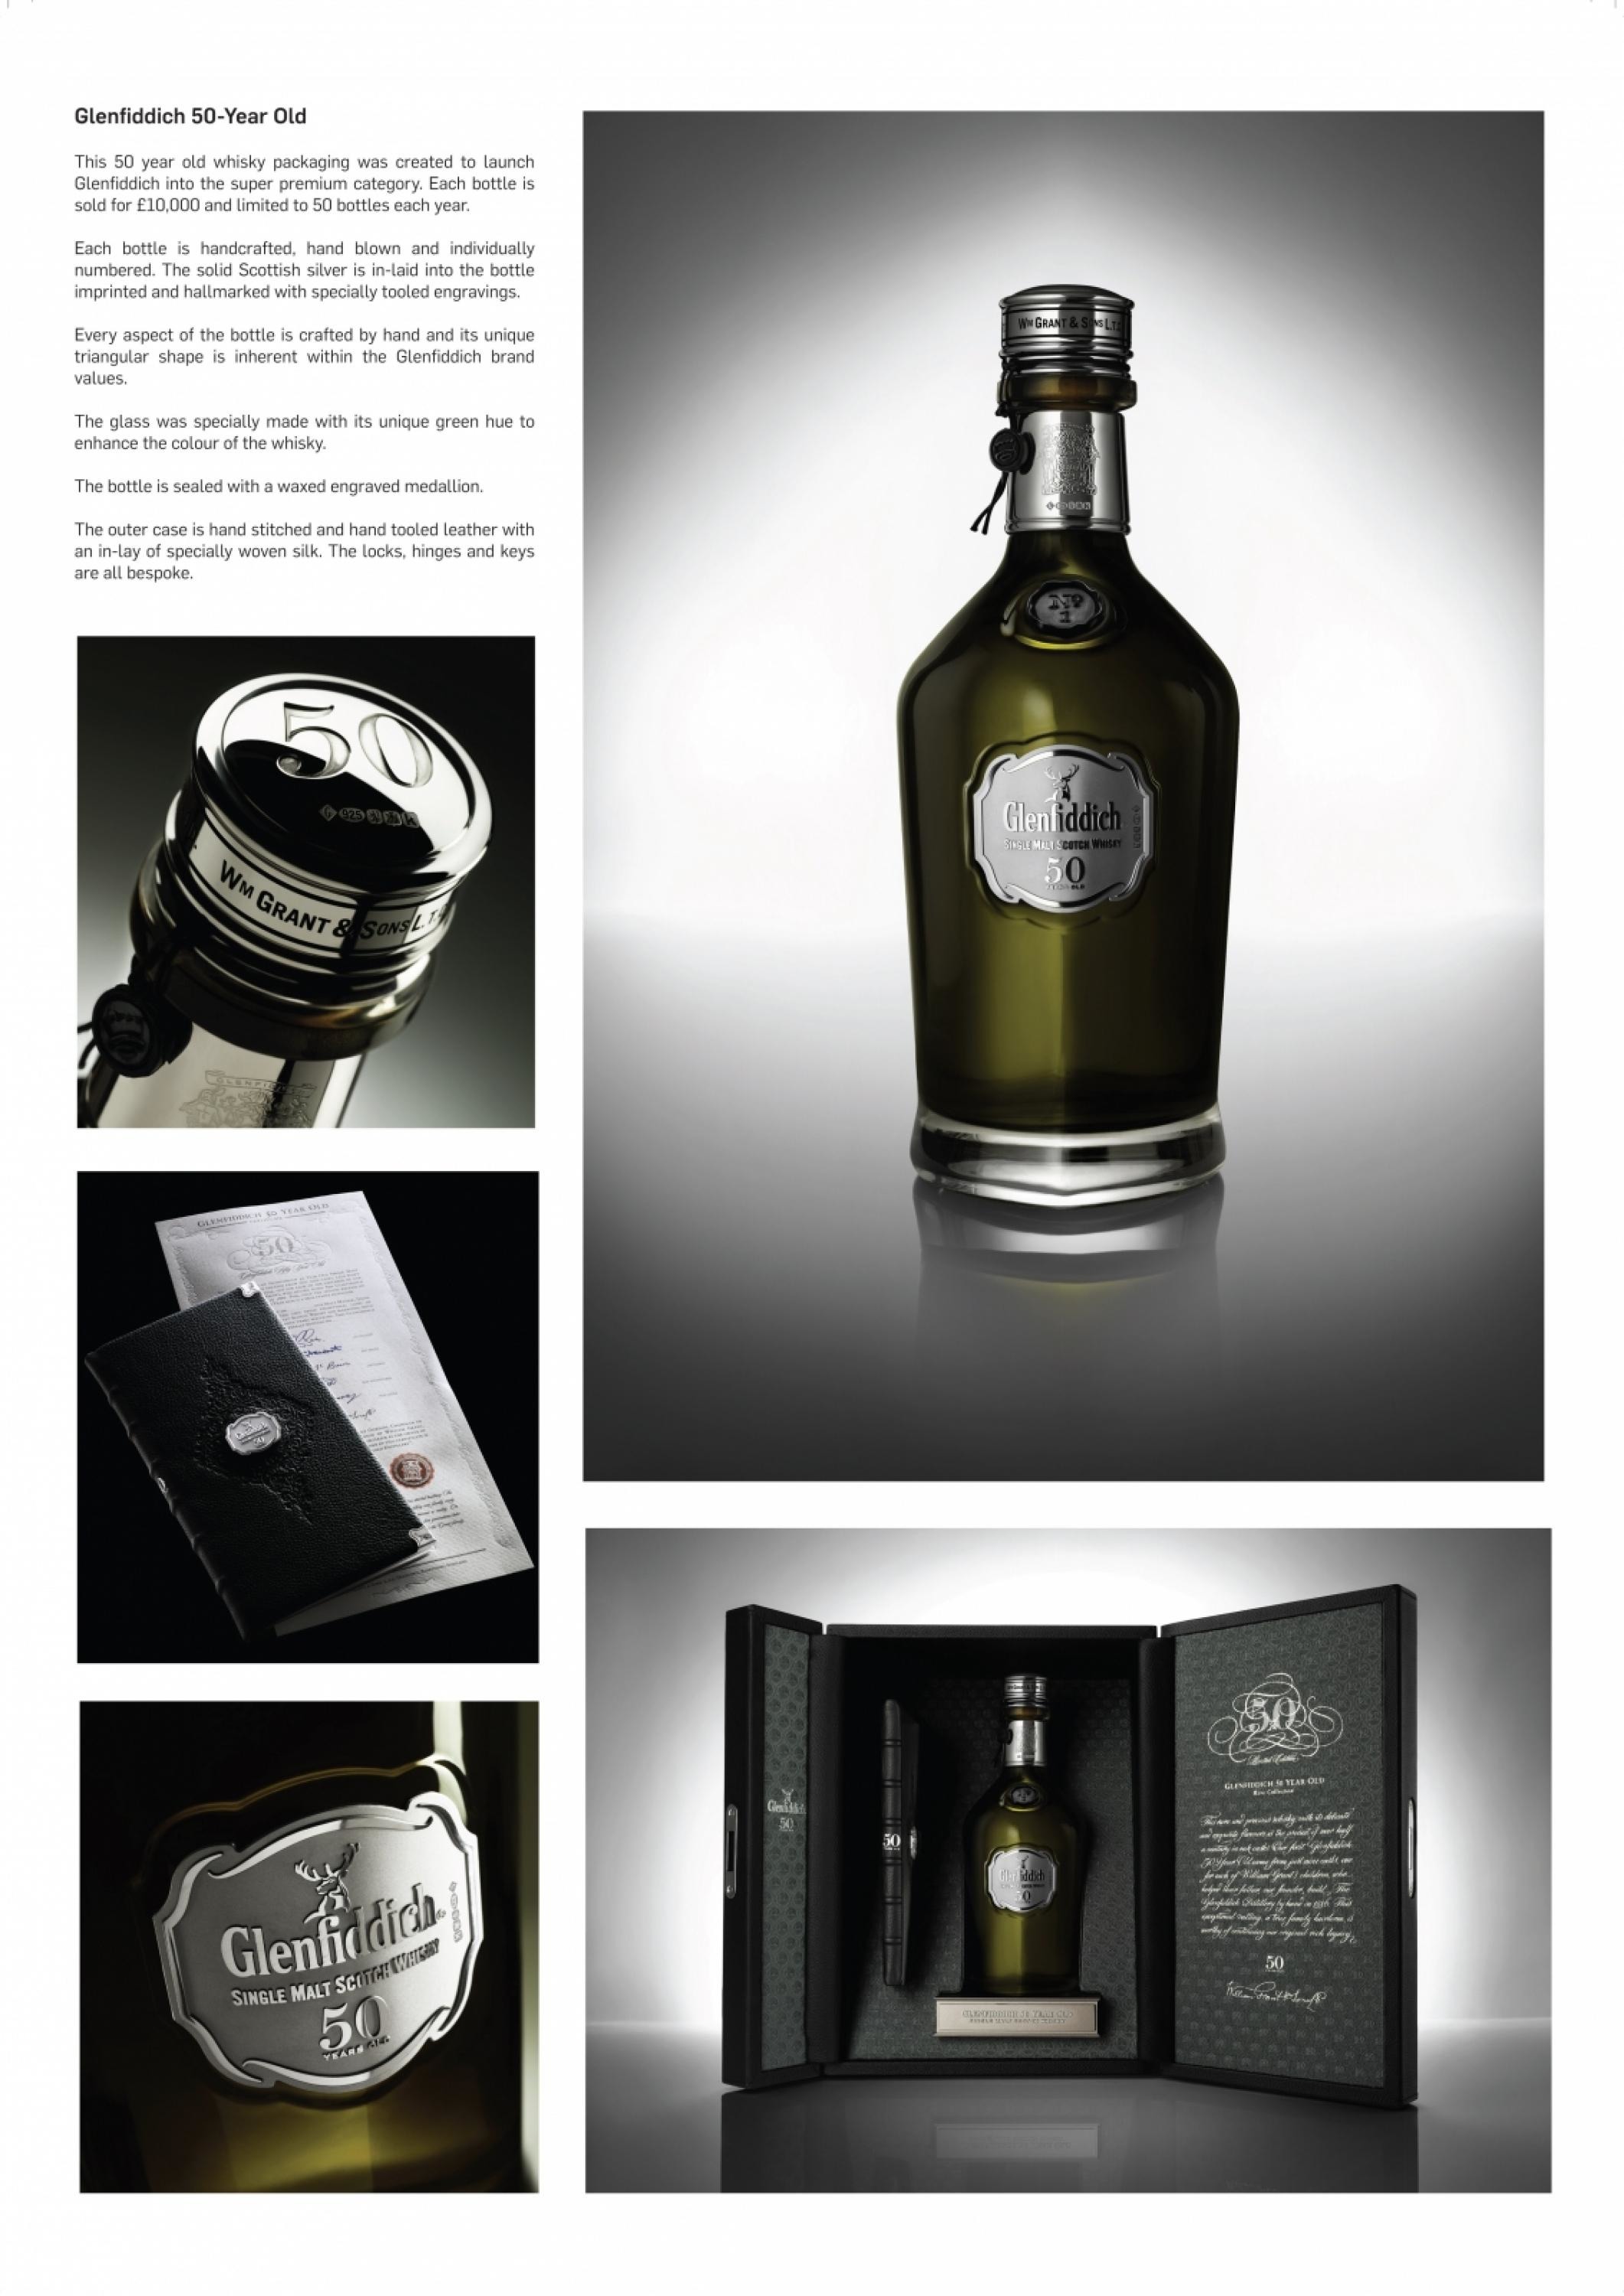 GLENFIDDICH 50-YEAR OLD WHISKY